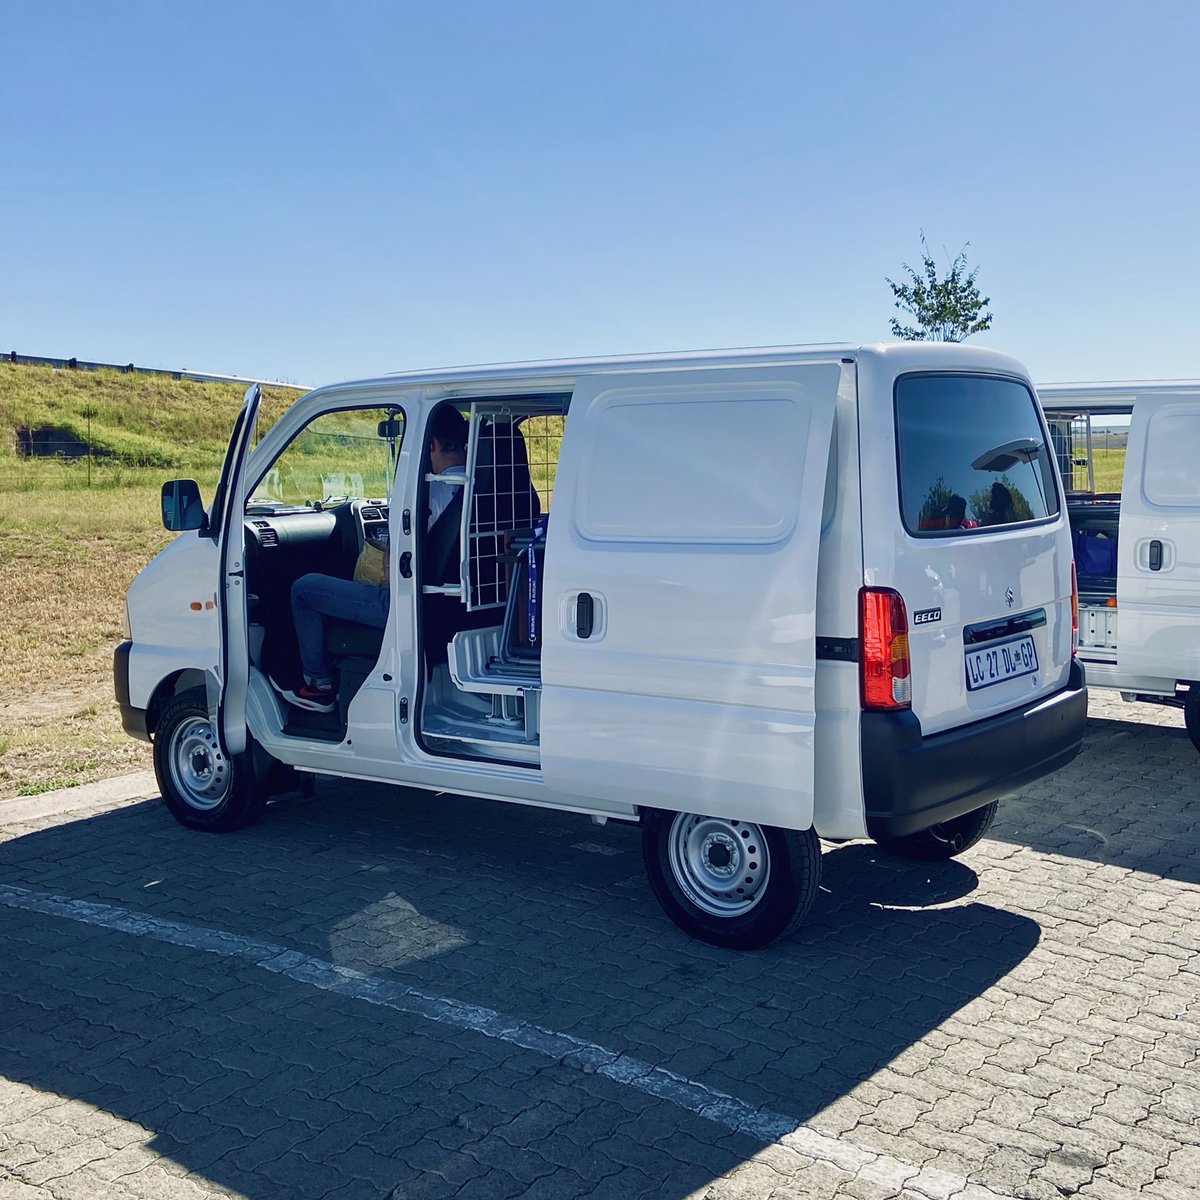 We’ve begun our Suzuki Eeco Rally to Read adventure in Vrede in the Free State. Our companion for the trip is the resourceful and the new Suzuki Eeco 1.2 panel van. Power comes from a 1.2L Advanced…
#SuzukiEeco #SuzukiSA #EecoPanelVan